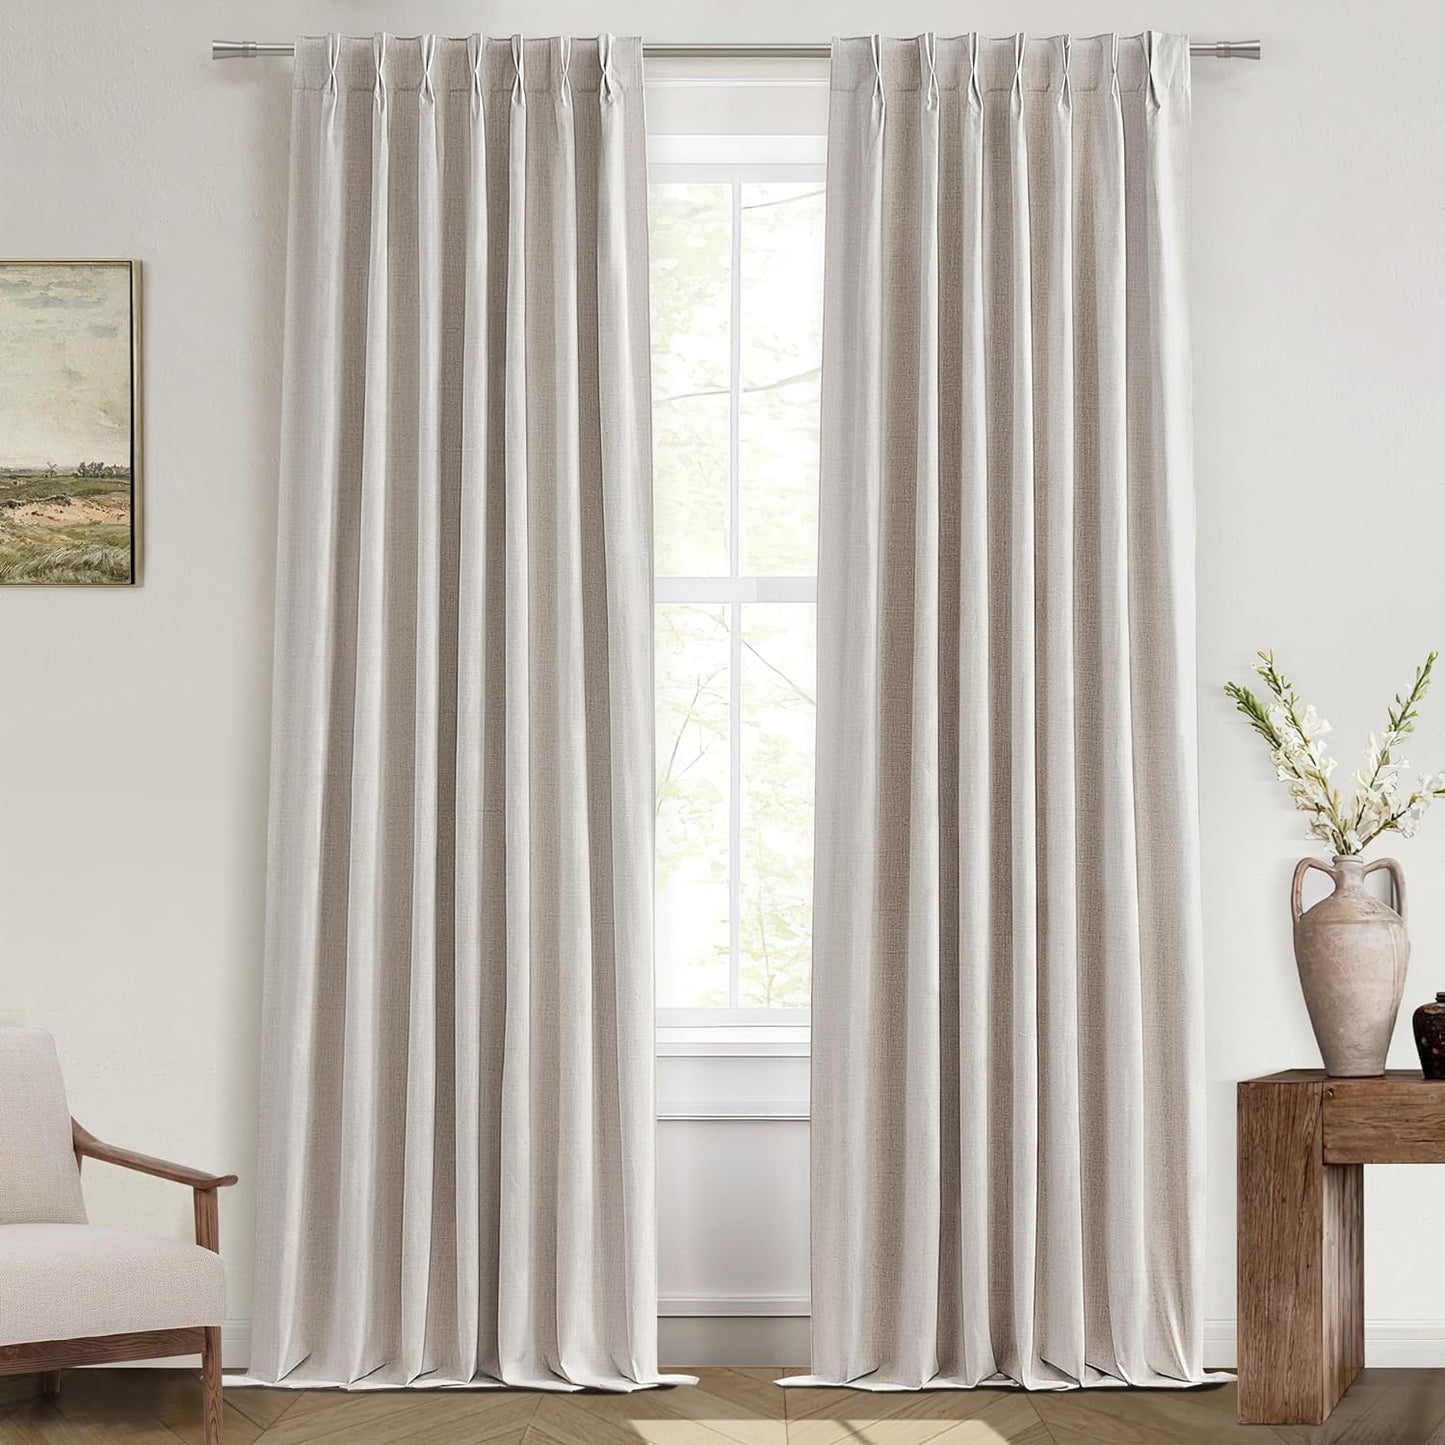 Natural Linen Pinch Pleated Blackout Curtains & Drapes 96 Inch Long Bedroom/Livingroom Farmhouse Curtains 2 Panel Sets, Neutral Track Room Darkening Thermal Insulated 8Ft Back Tab Window Curtain  QJmydeco Natural Linen 40"W X 105"L X 2 Panels 